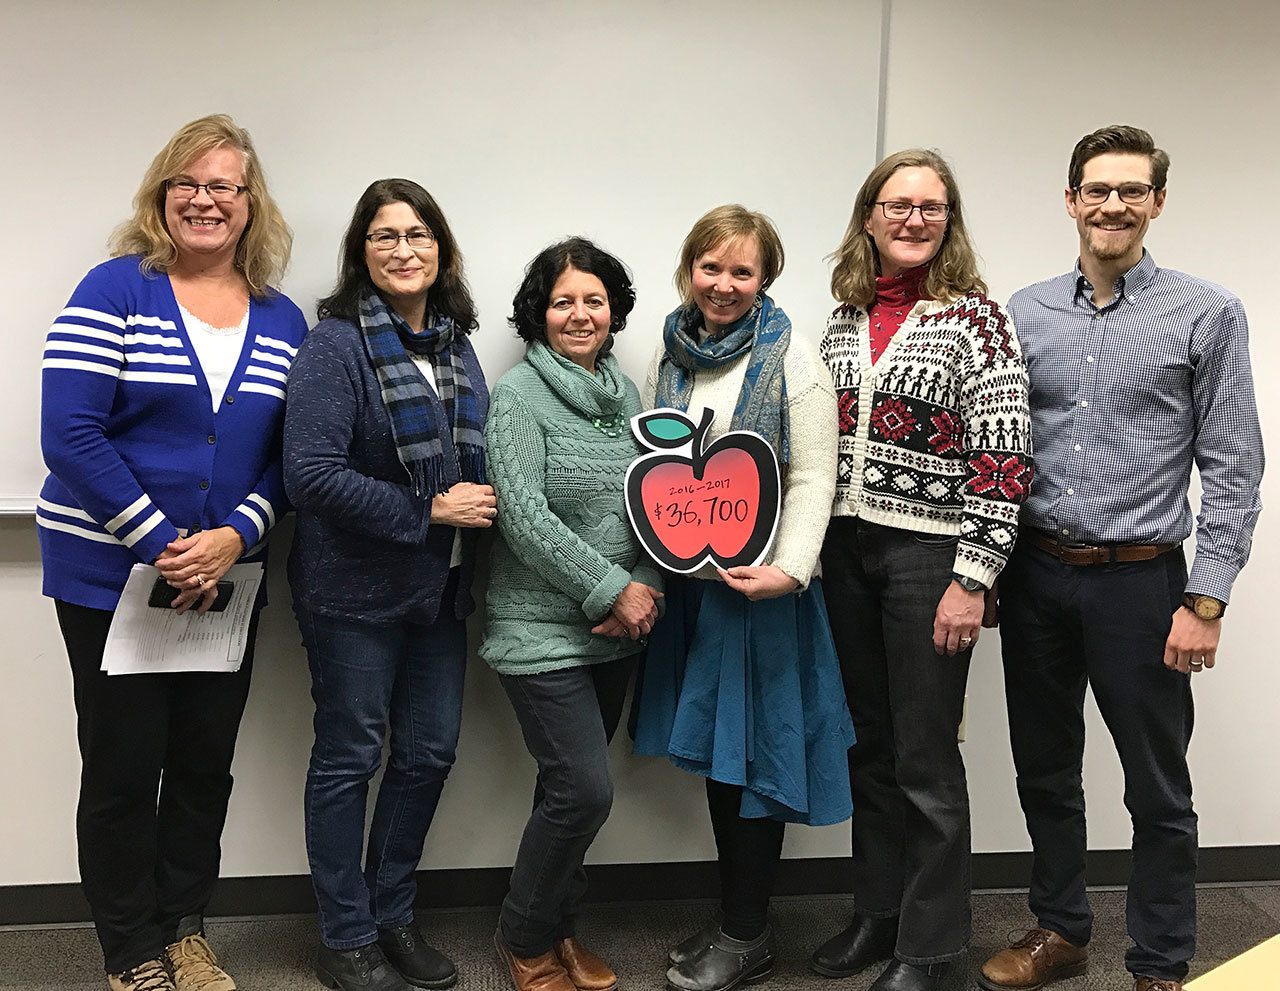 Left to right: PIE board co-presidents Ingrid Peterson and Sandie McTighe with Chautauqua Elementary School’s Glenda Berliner and Aristy Gill, McMurray Middle School’s Lea Heffernan and Vashon High School’s Jordan Browning. (Toby Holmes Photo)